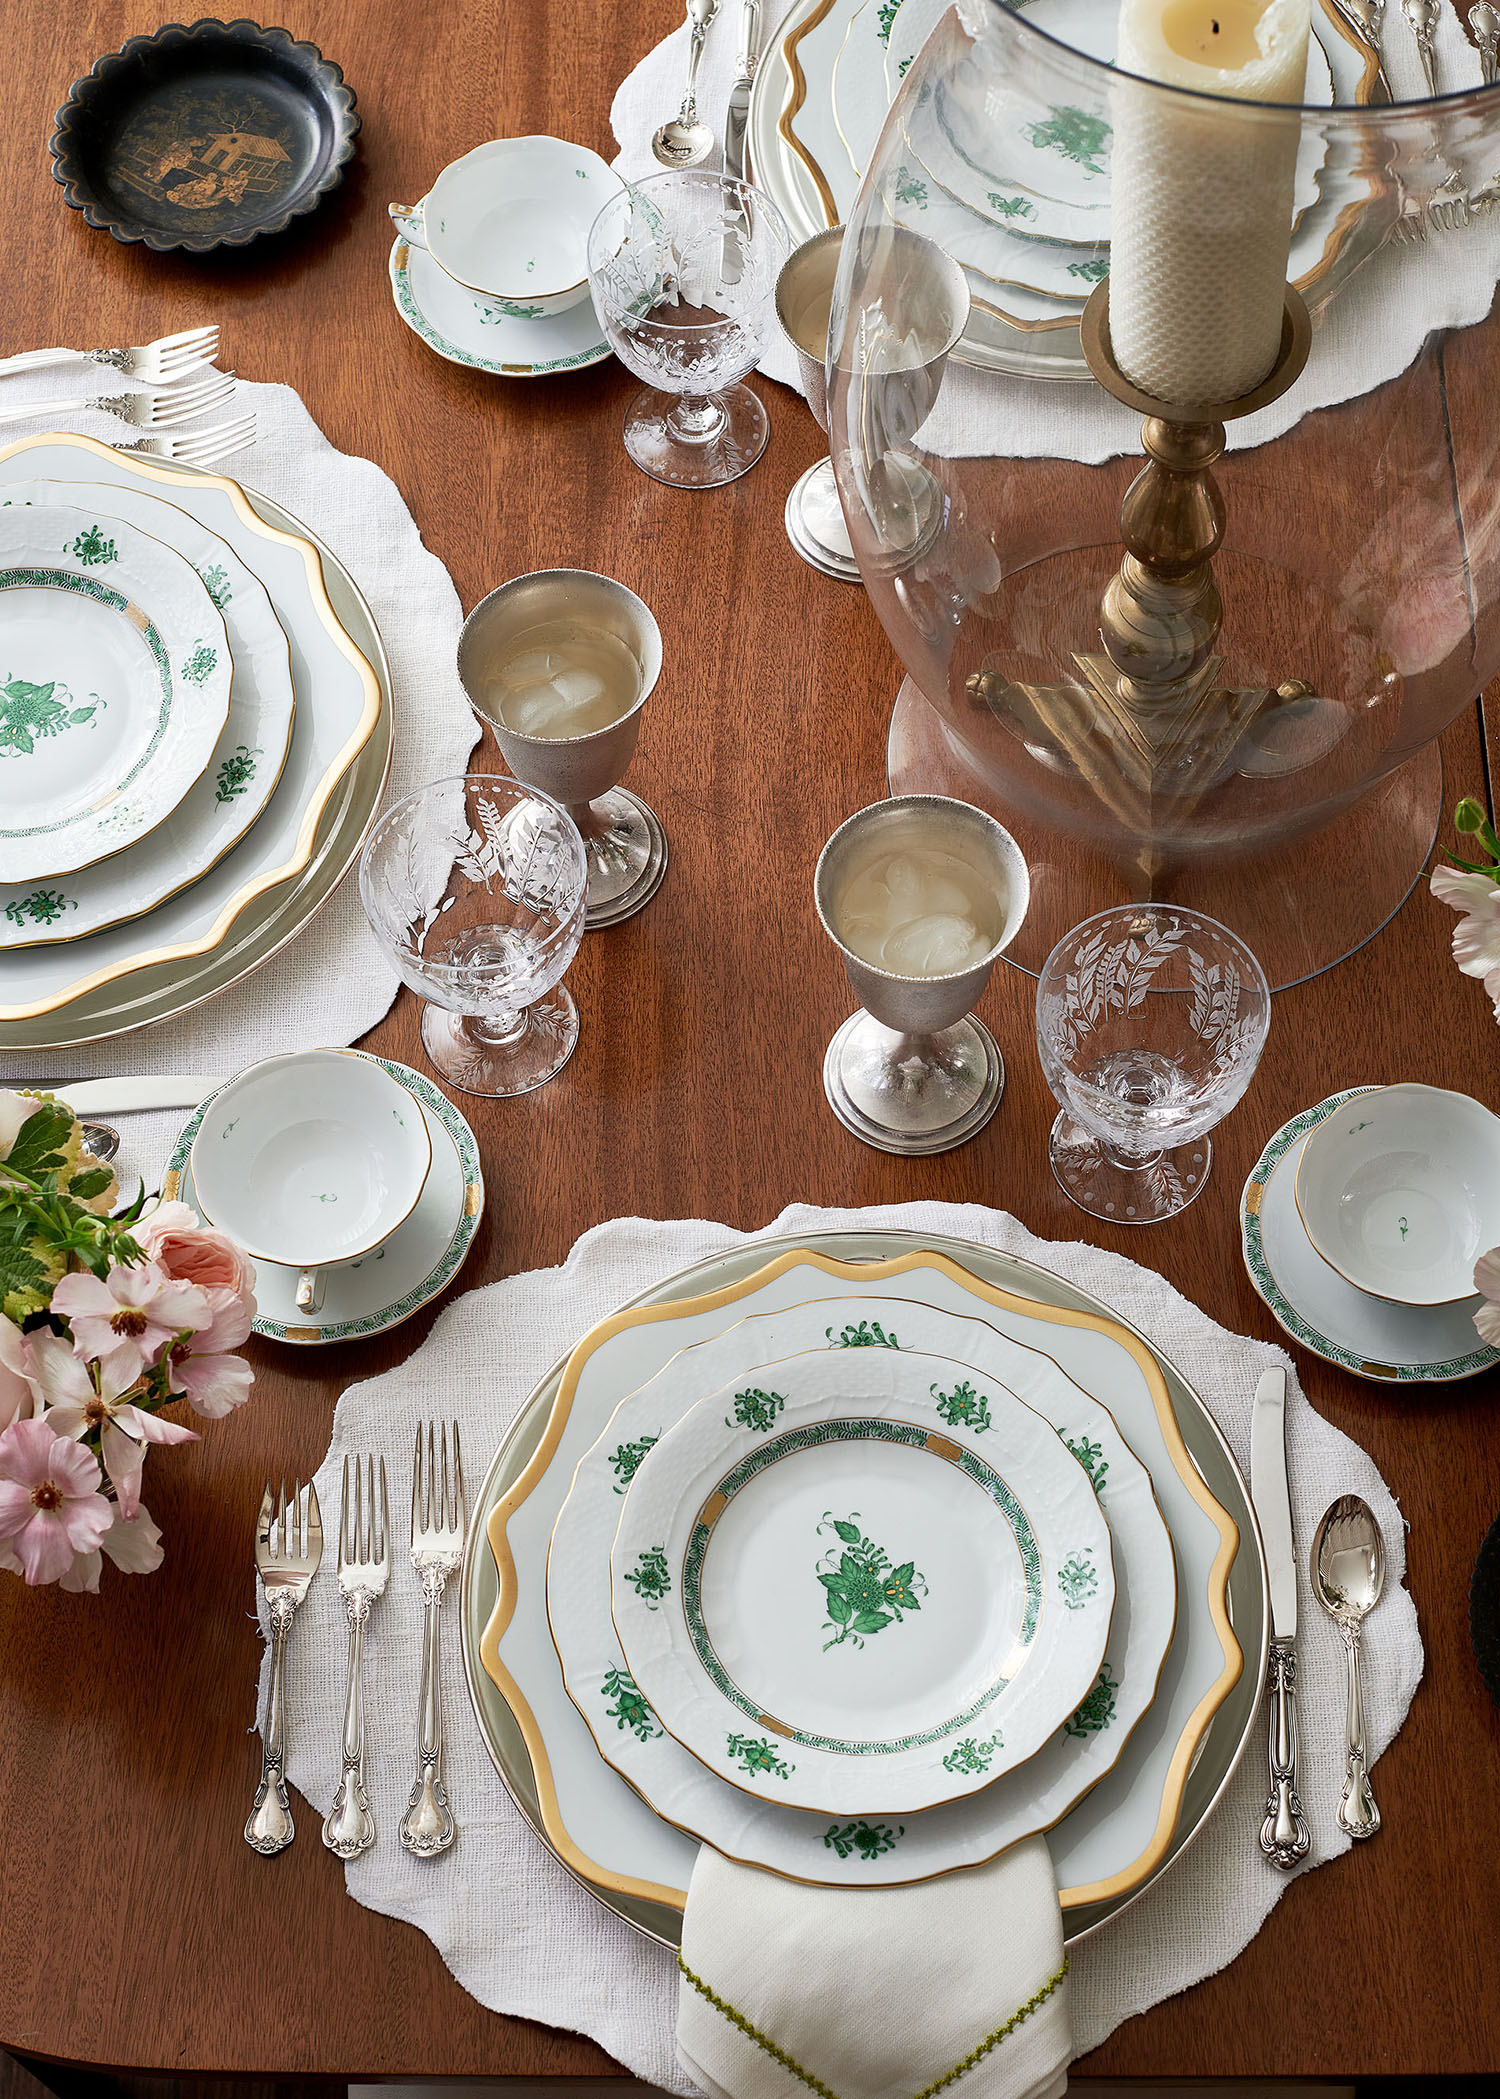 Fancy china place setting  in Arkansas Home by Heather Chadduck in Veranda Magazine by Alison Gootee photography